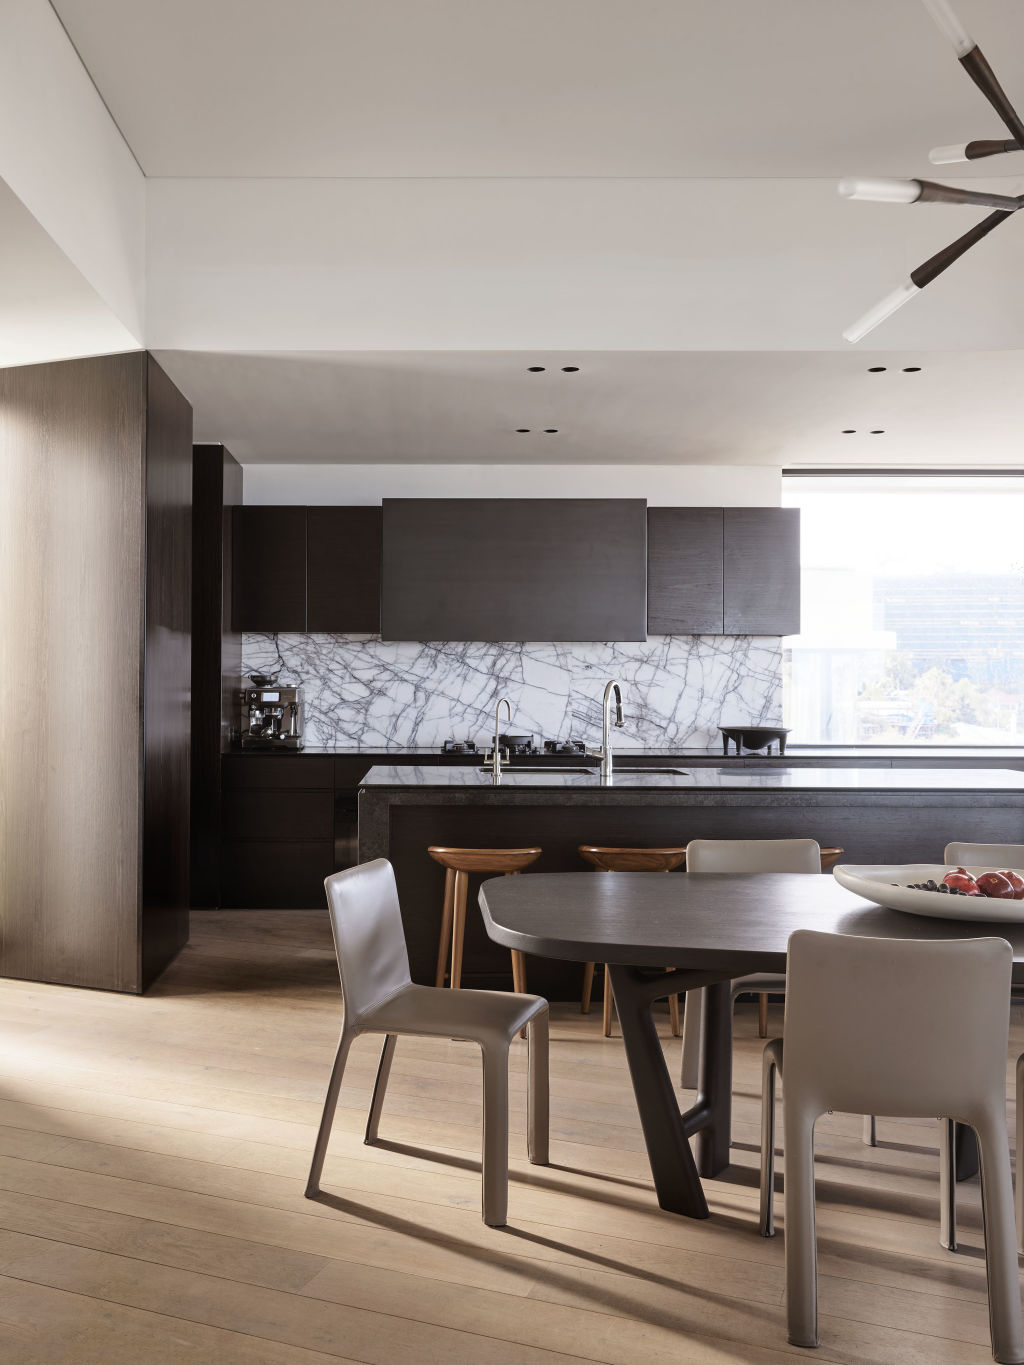 The kitchen is the heart of the home and is a melee of finishes from dark-stained timber veneer to New York marble and brushed granite. Photo: Anson Smart